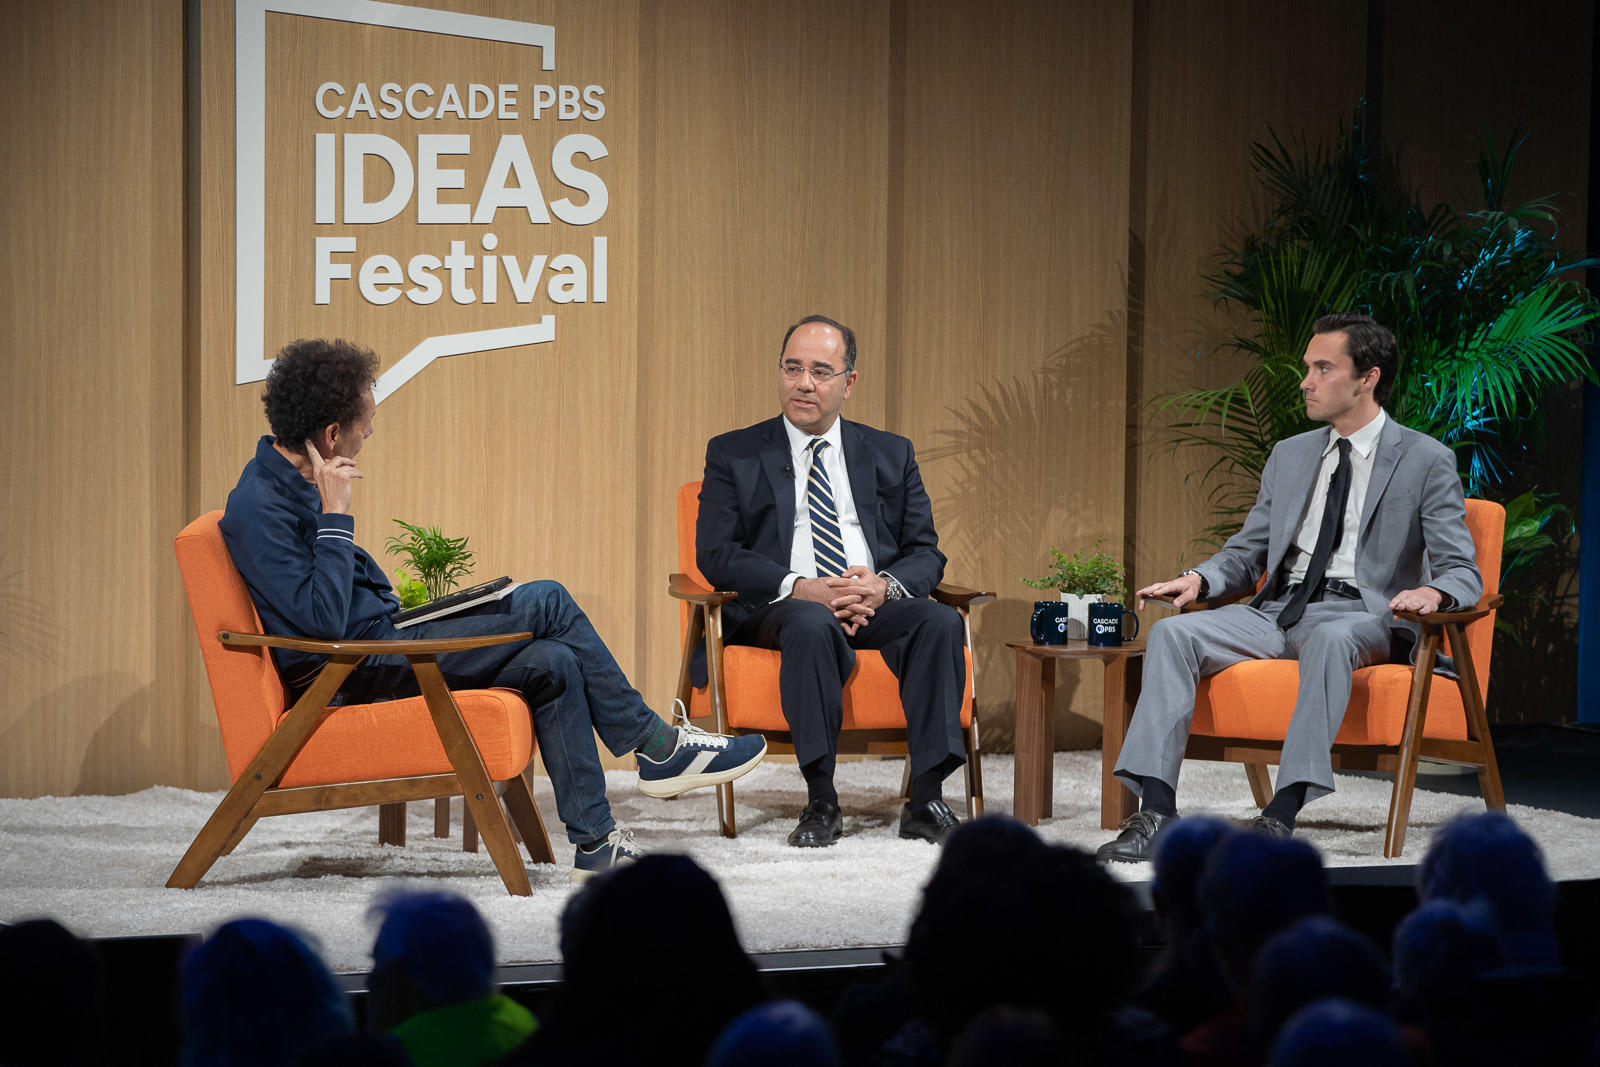 Three men sit on orange chairs on the Cascade PBS Ideas Festival stage